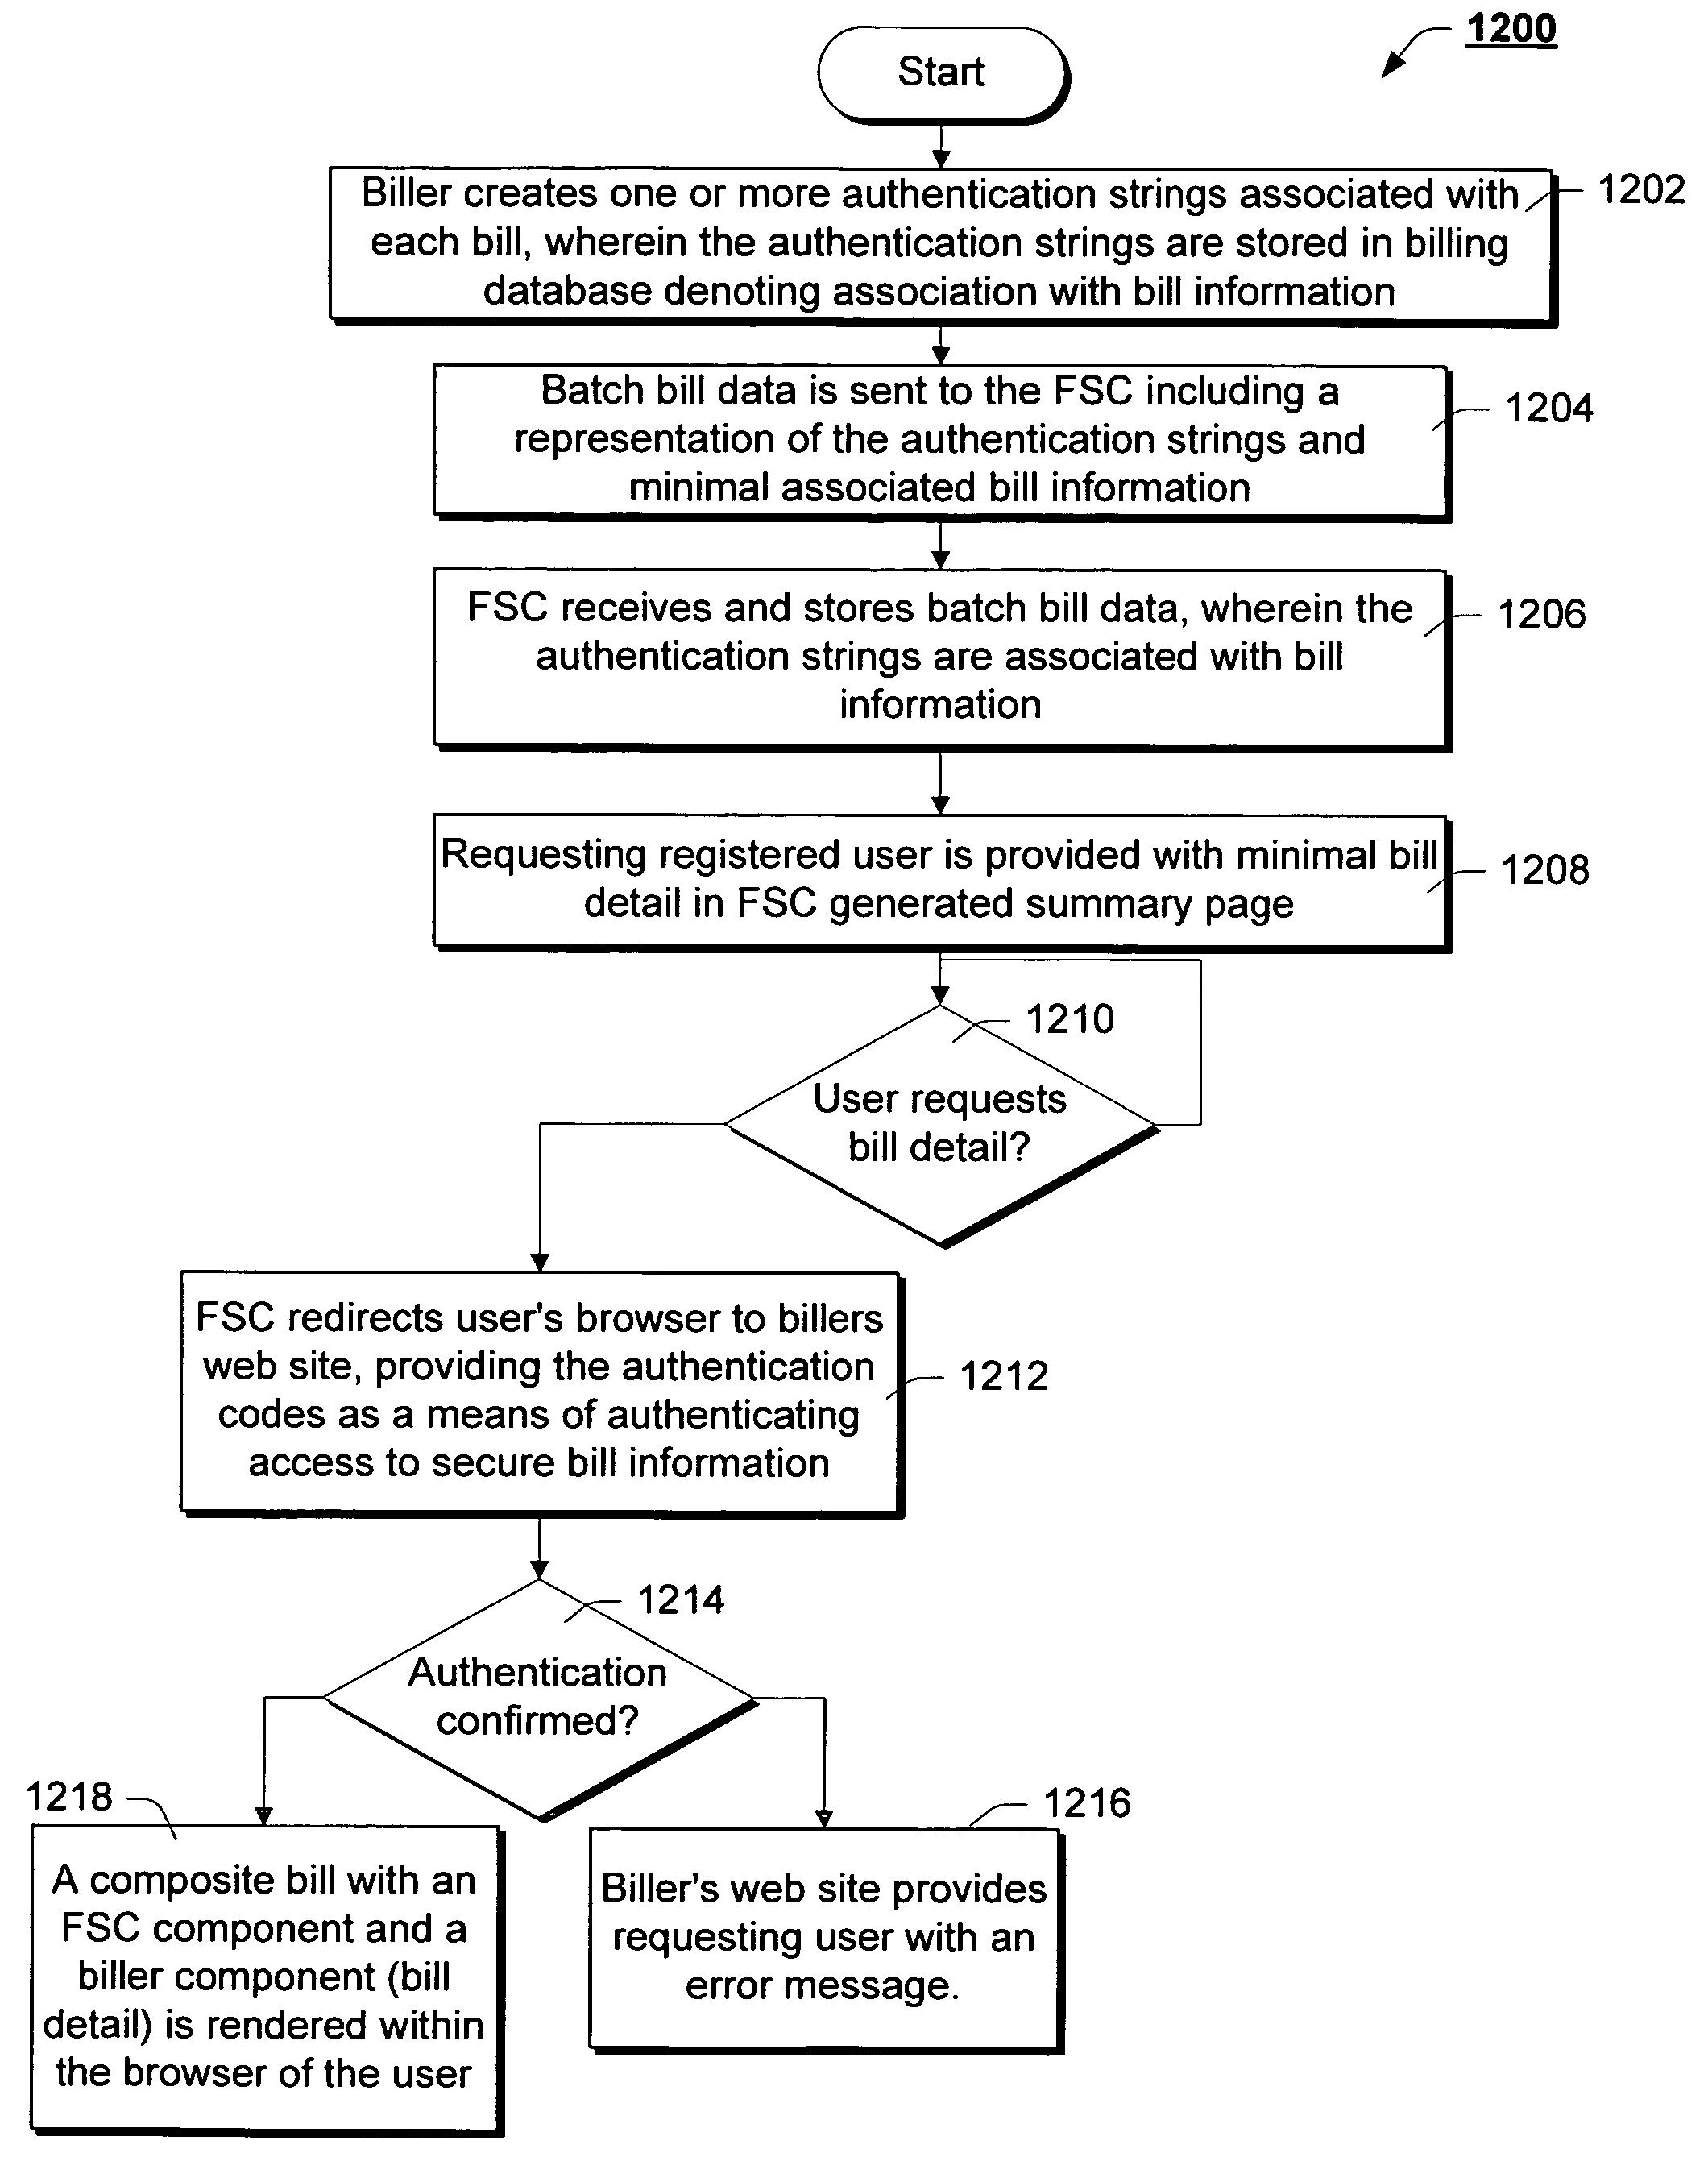 System and method for secure third-party development and hosting within a financial services network